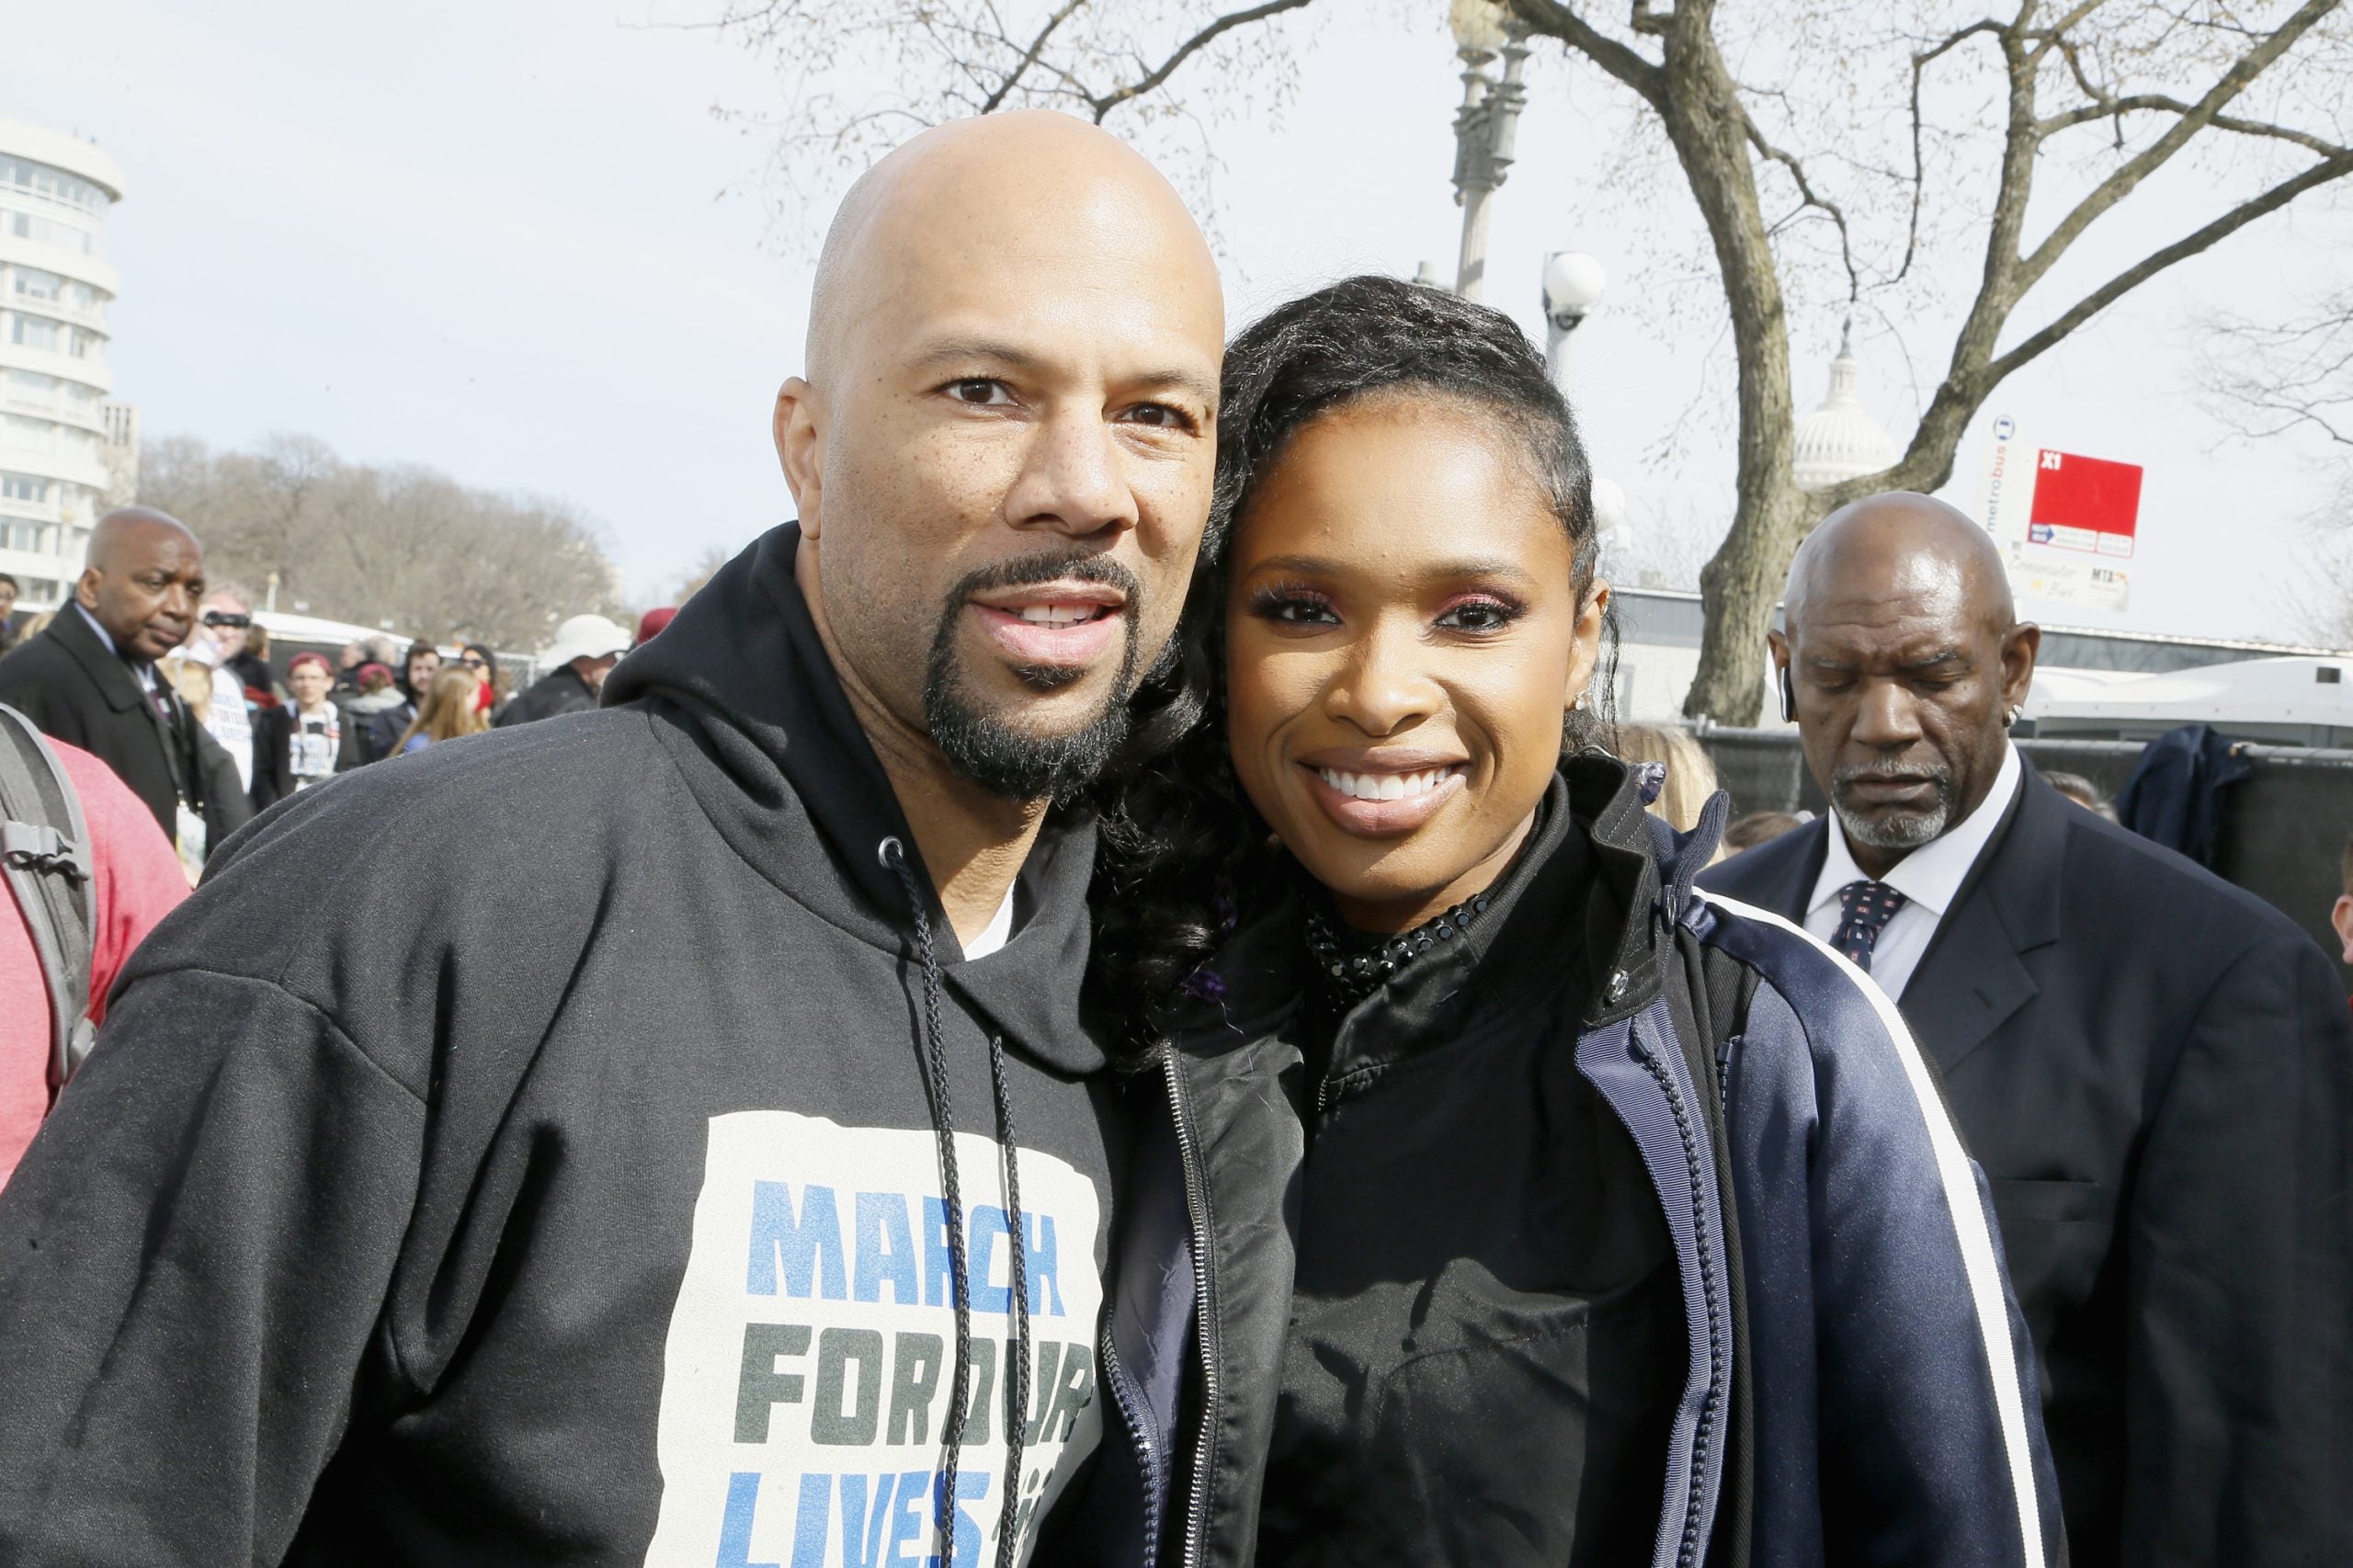 Jennifer Hudson Seen Holding Hands With Common After Confirming She's In A Relationship And ‘Very Happy’